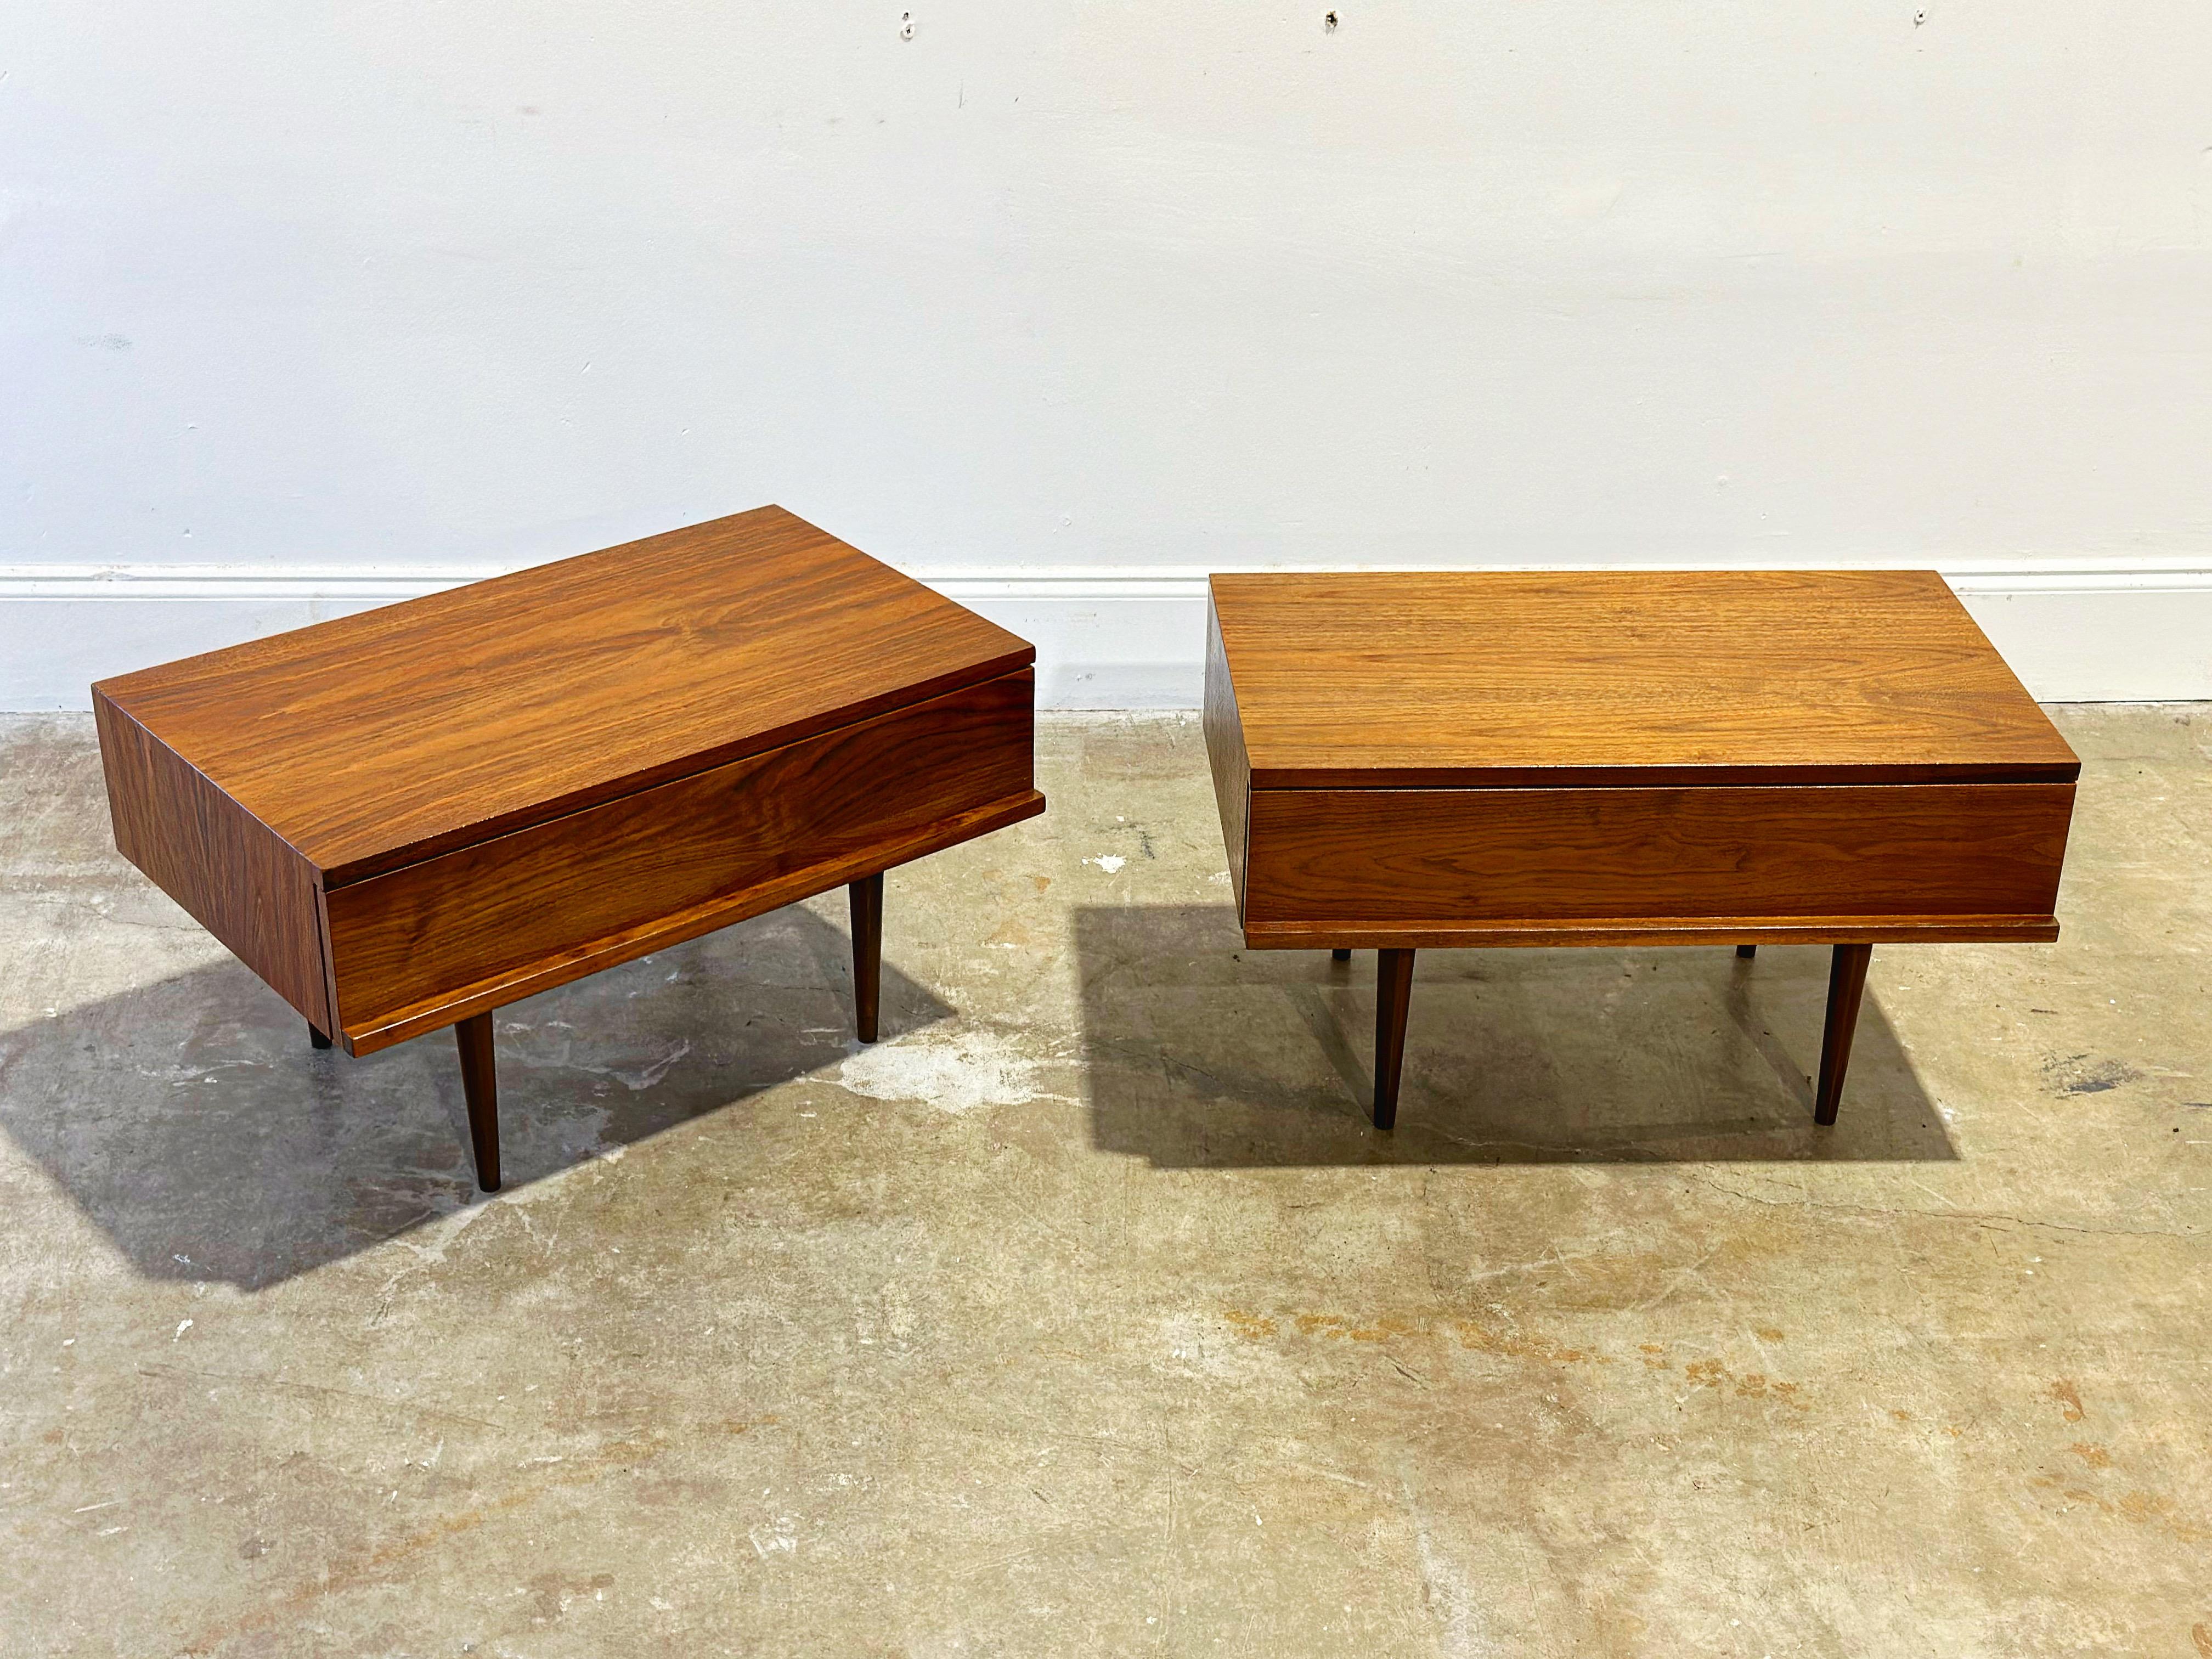 Scarce pair of over-sized nightstands or end tables by Mel Smilow for Smilow-Thiel furniture, 1950s. Fully restored featuring stunning American black walnut grain. One large drawer in each unit. These tables are in excellent restored condition and